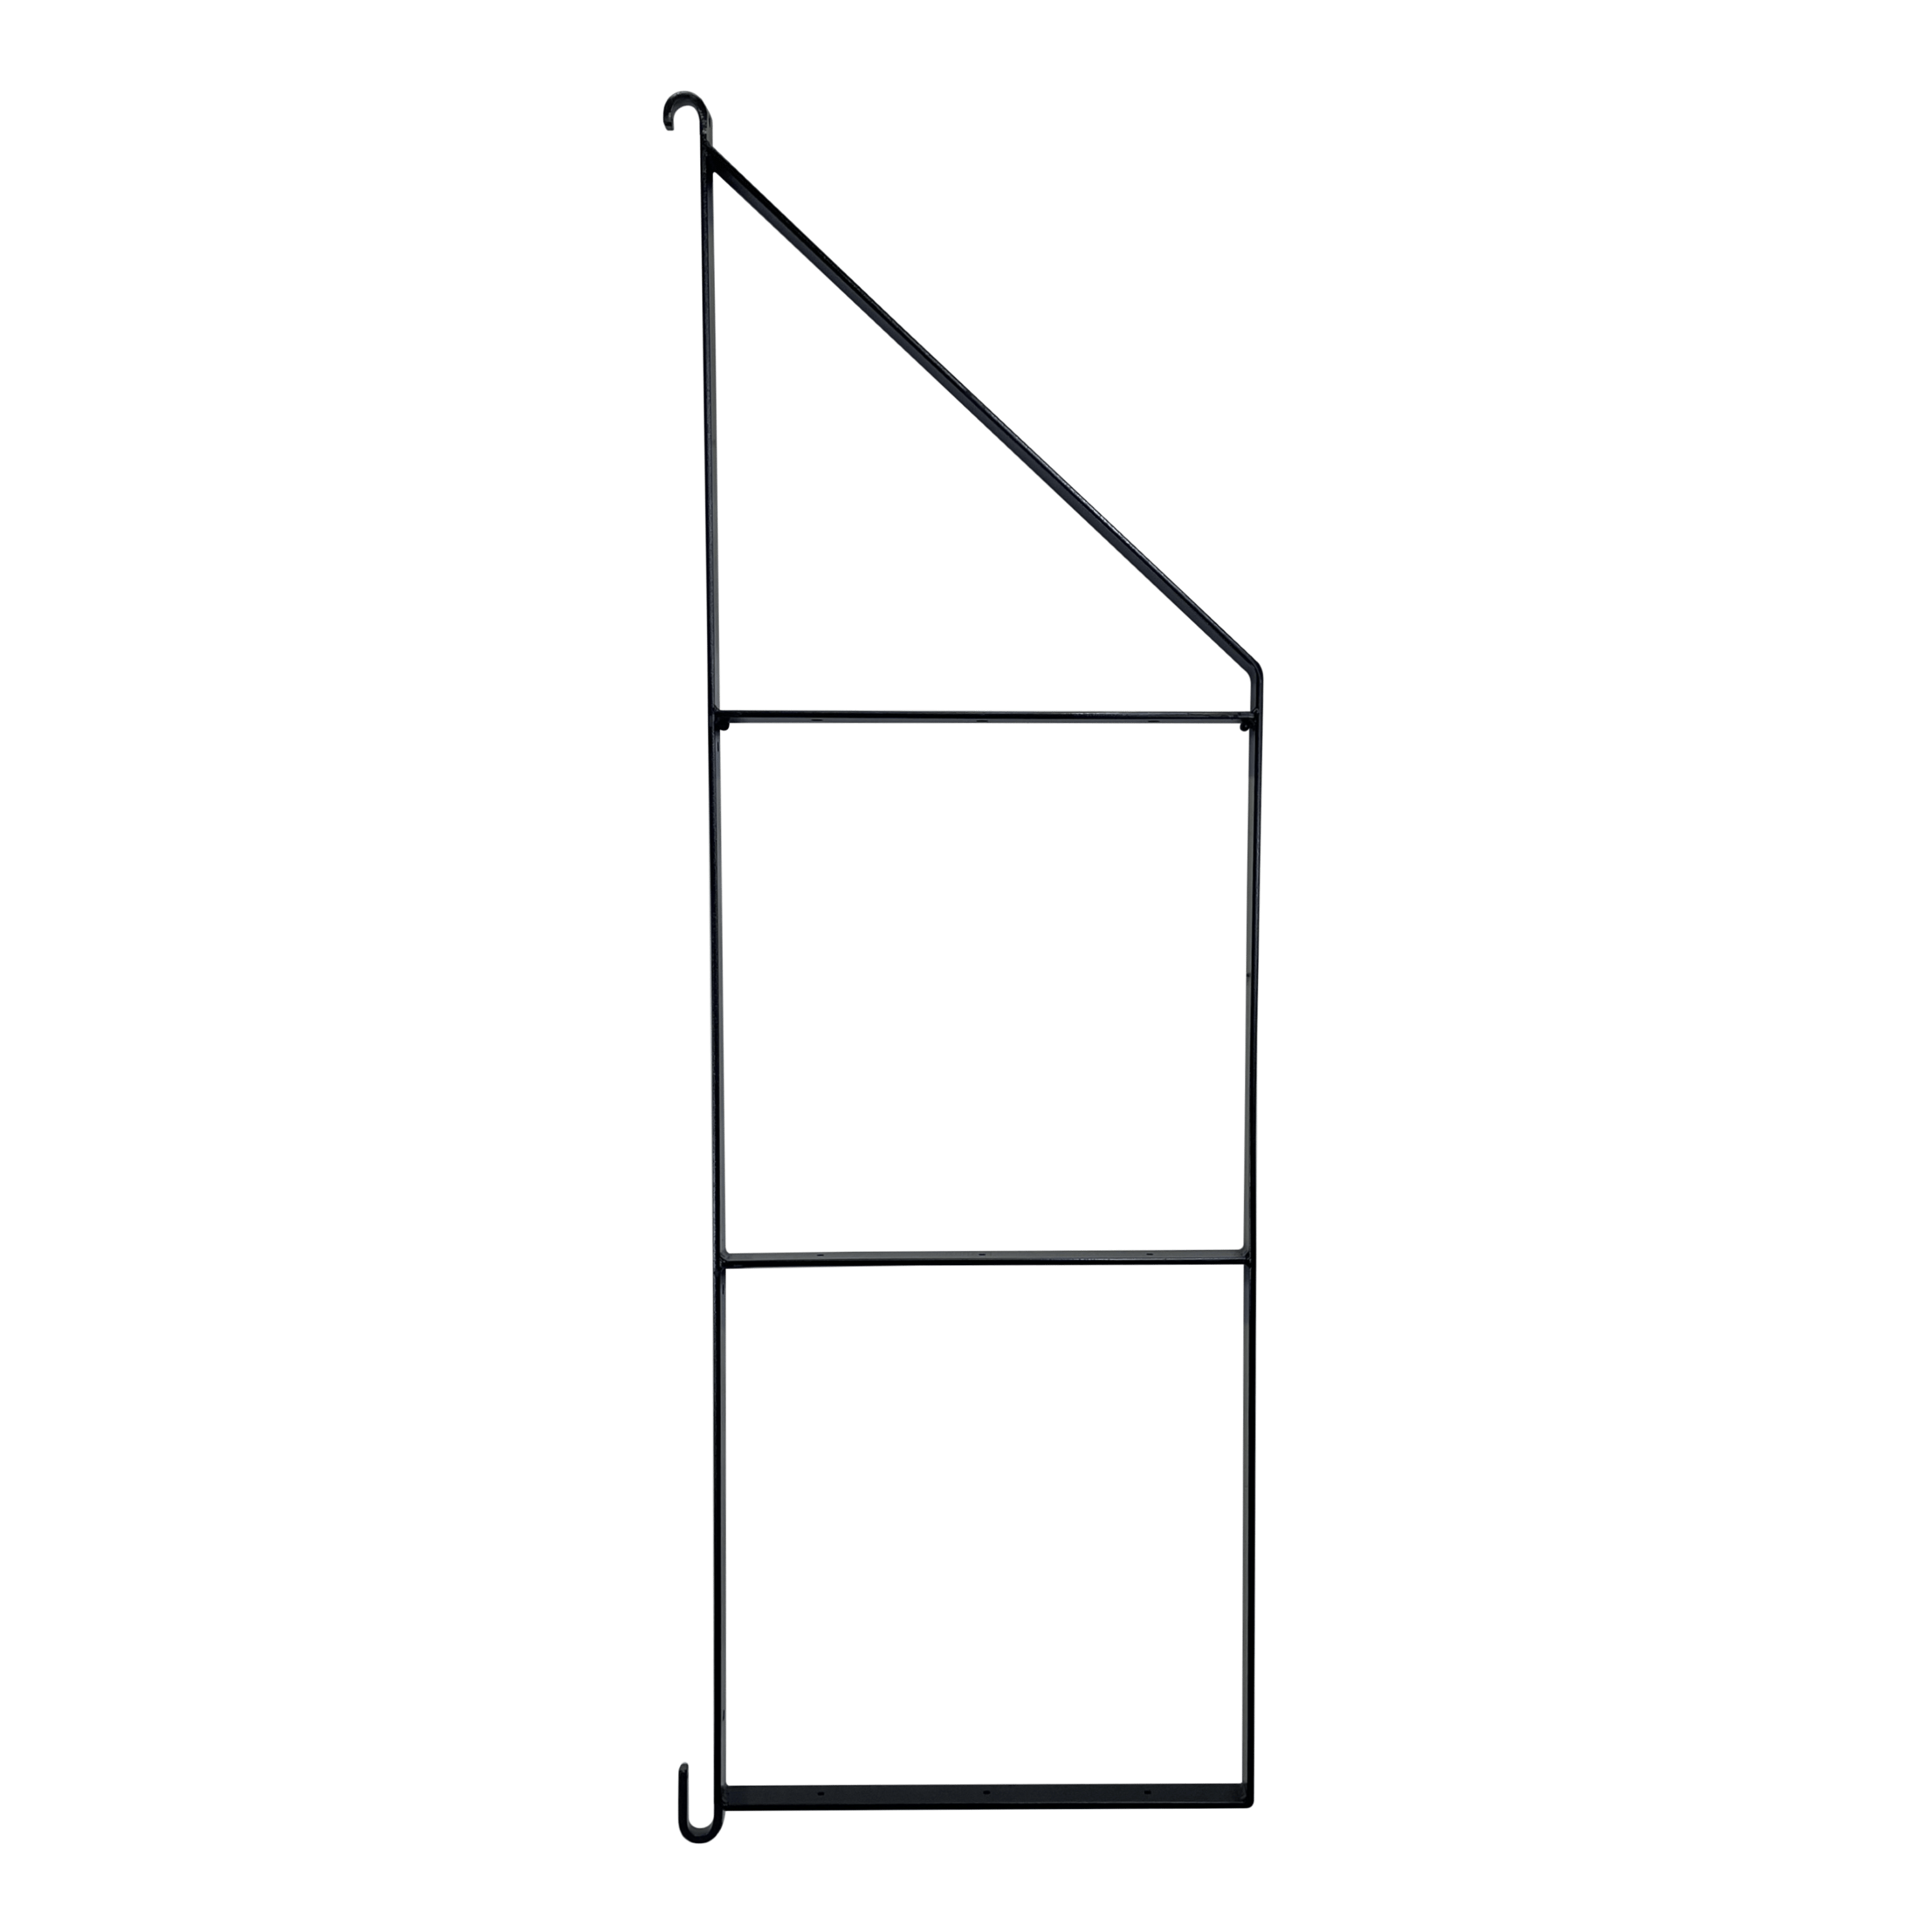 Shipping Container Shelf Bracket Questions & Answers